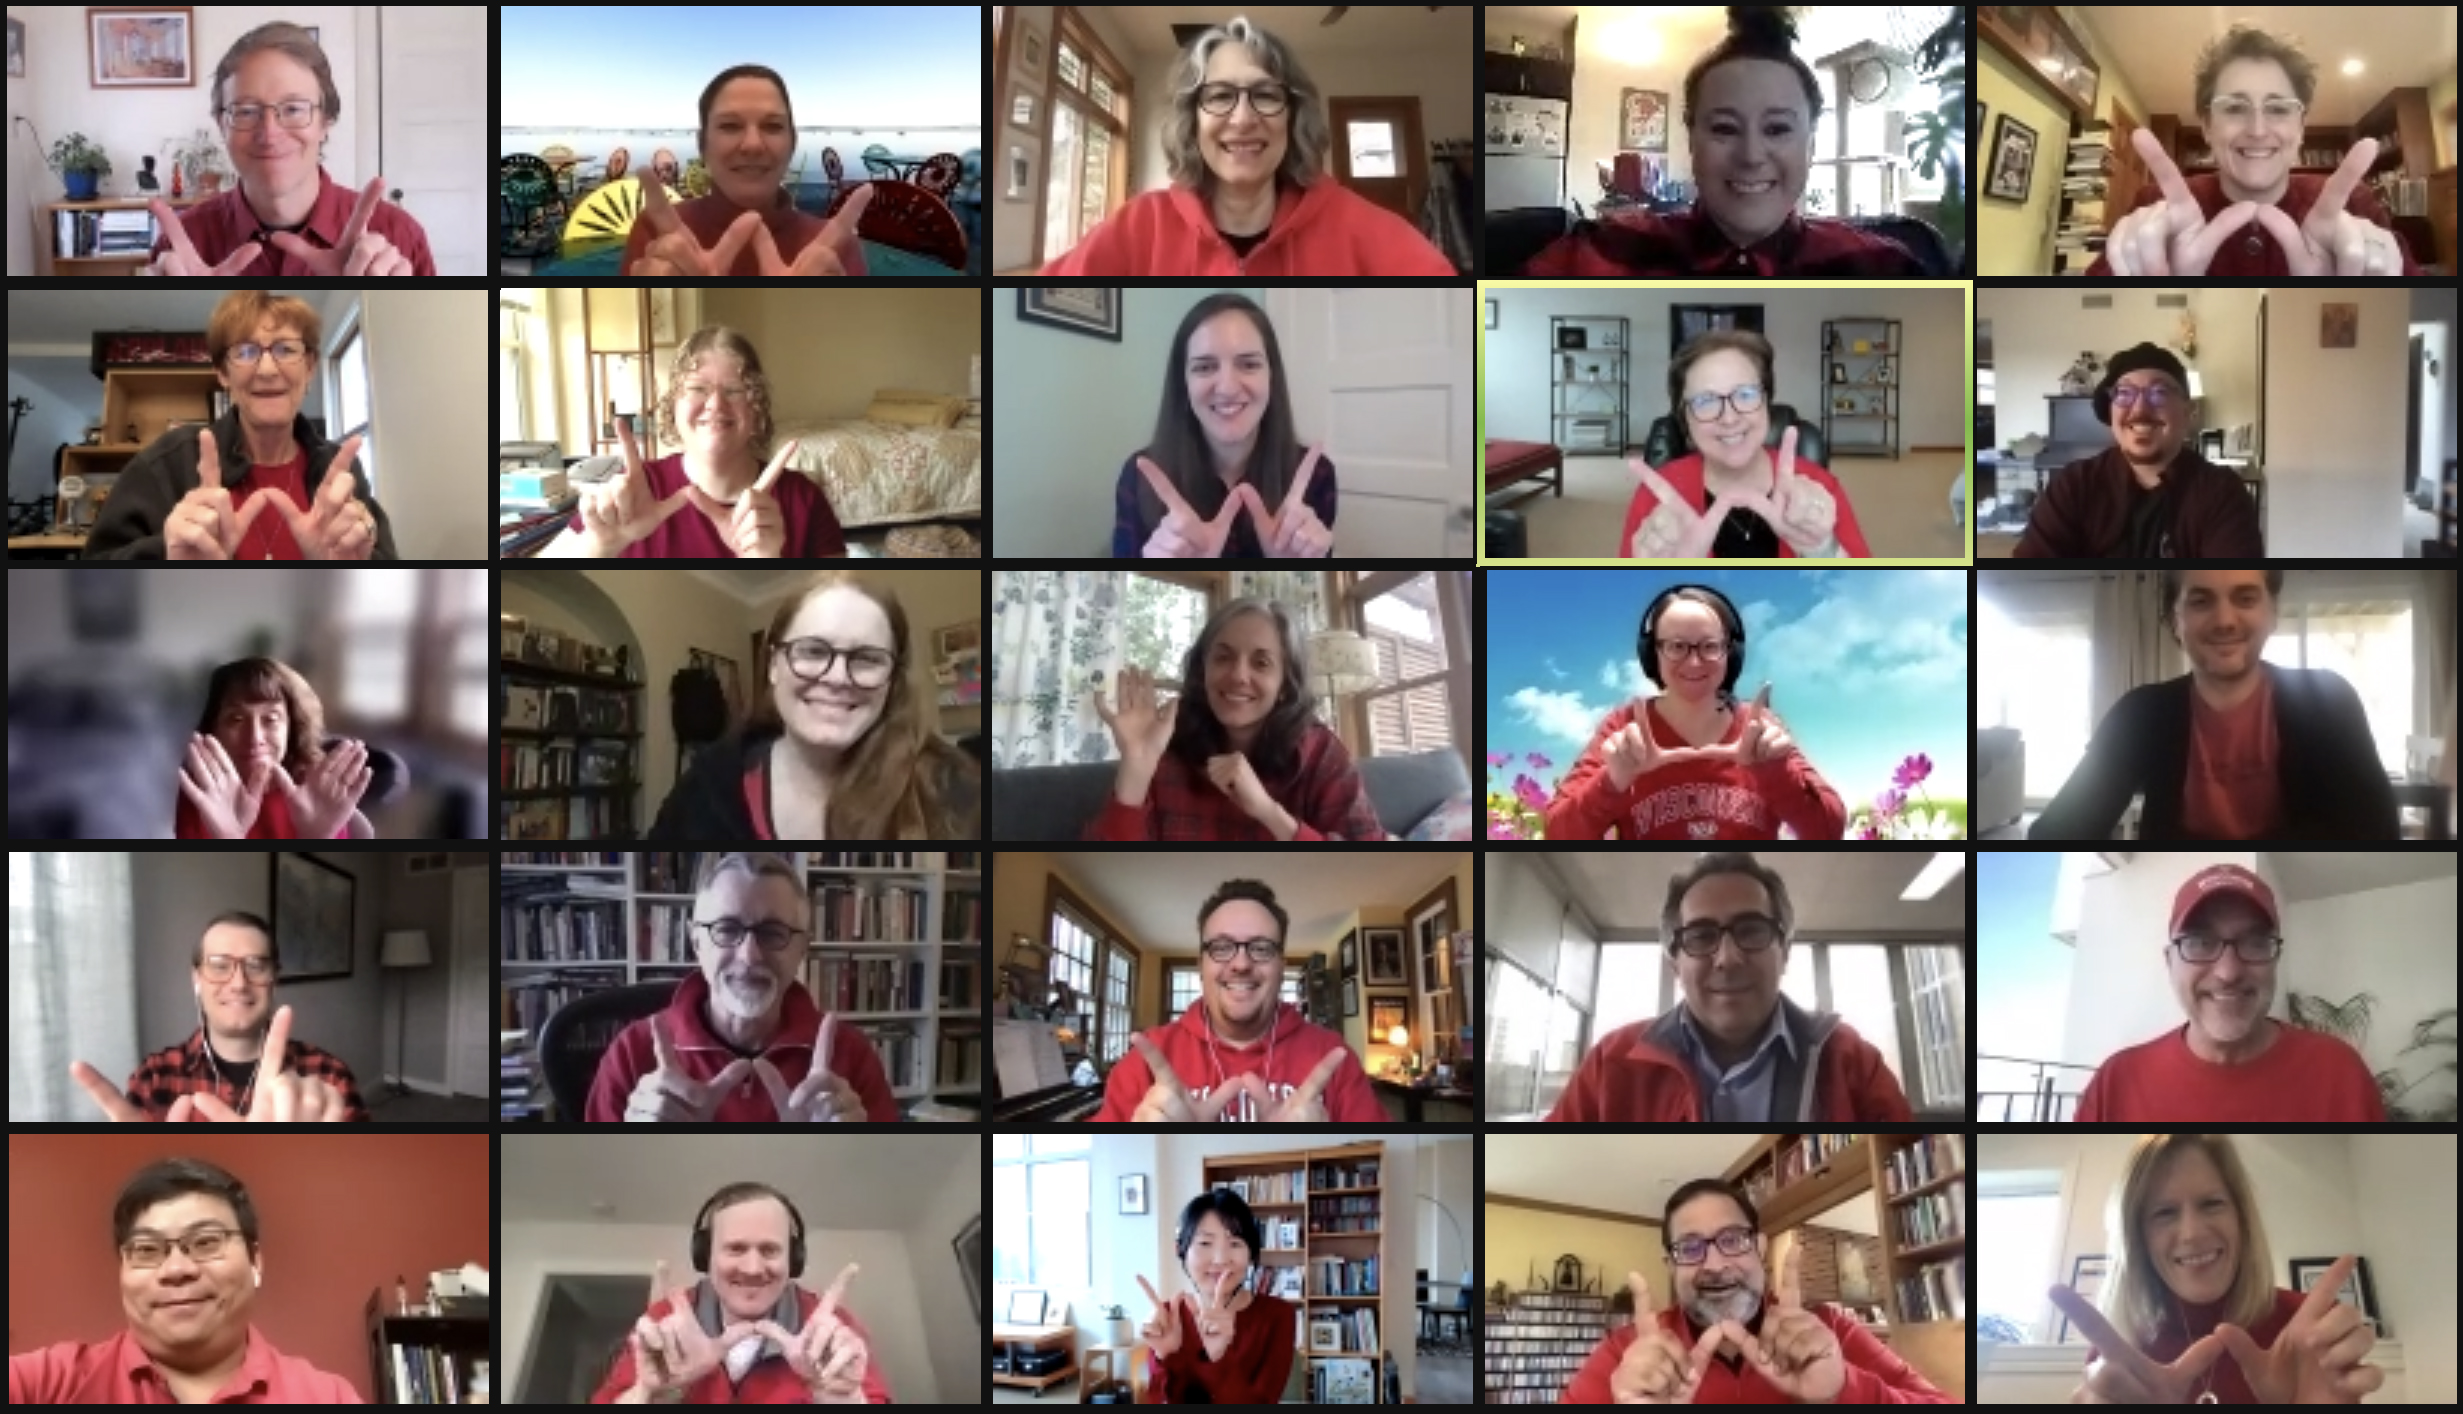 A Zoom meeting featuring the faculty and staff of the SJMC wearing red and holding their hands up in the shape of a 'W'.